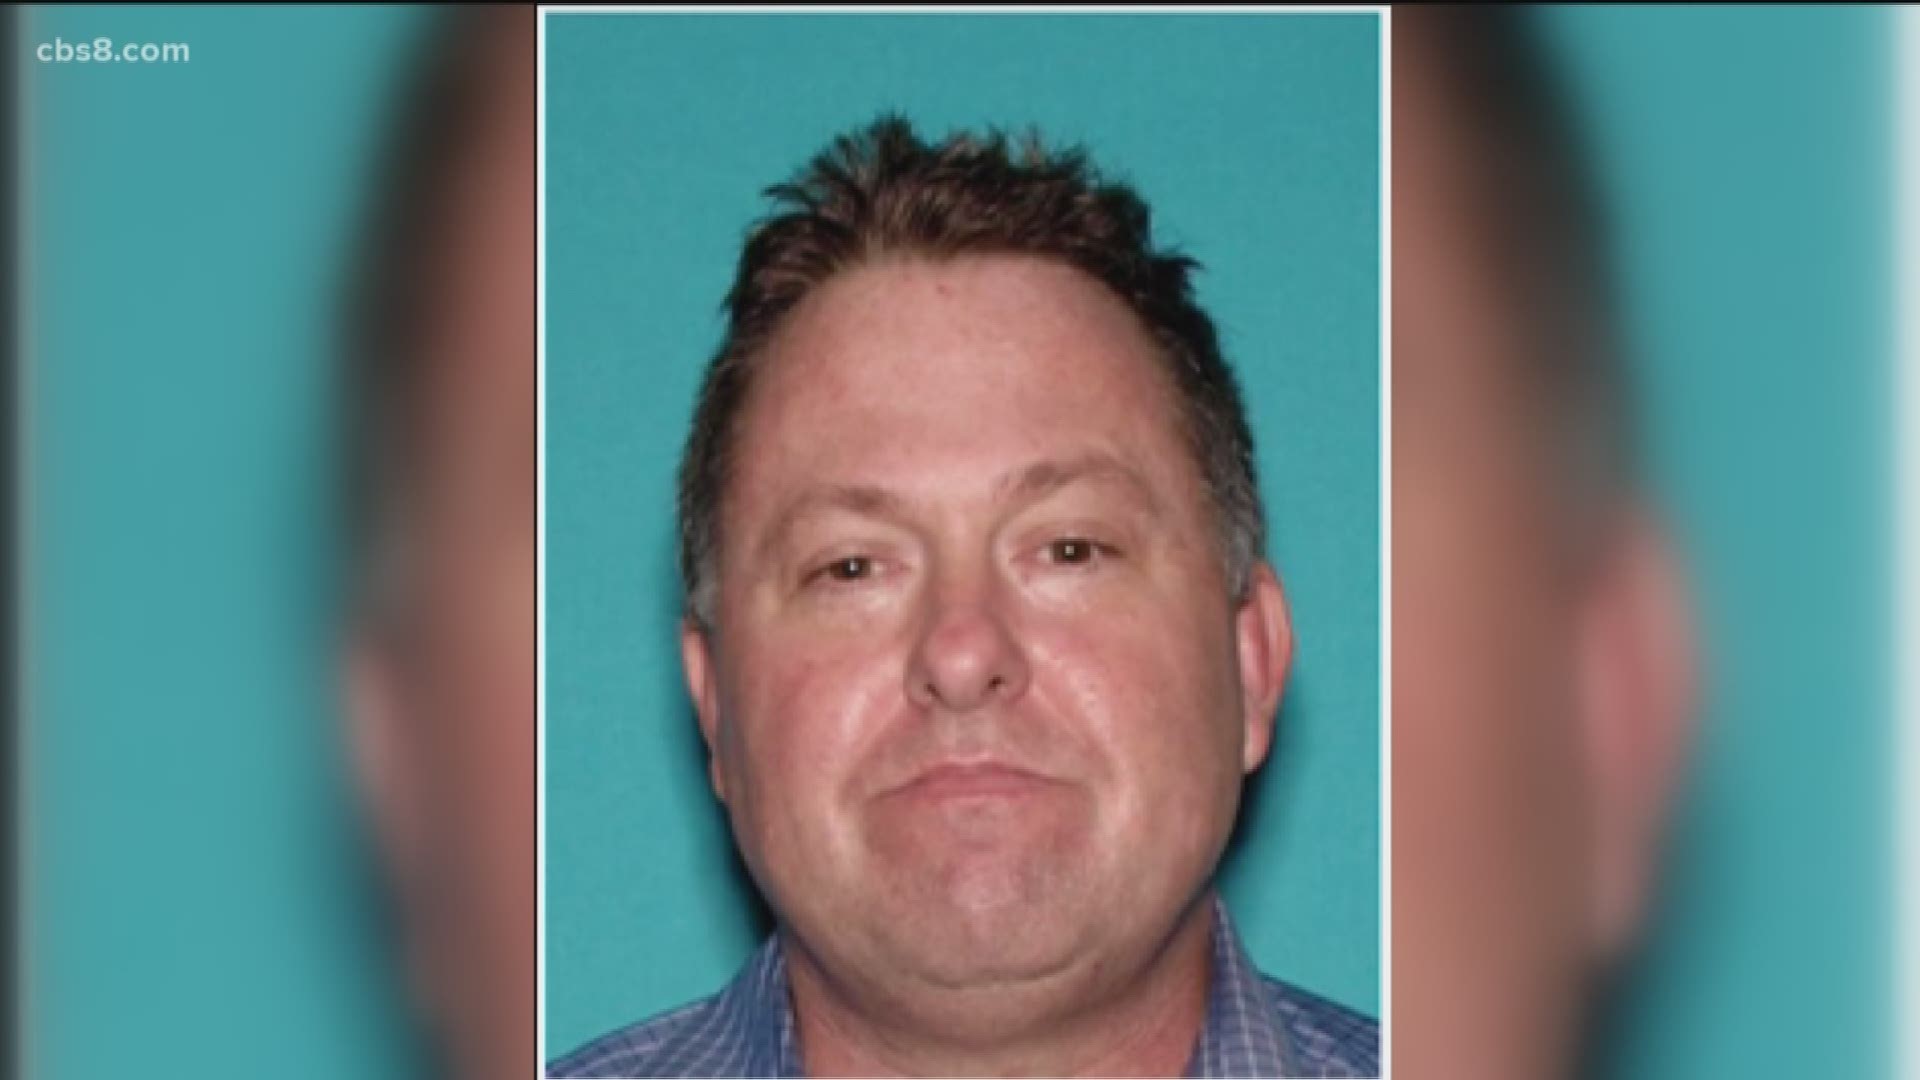 Investigators Tuesday put out a call to any additional victims of a Carlsbad man suspected of sexually assaulting four young women he met online, including a 16-year-old.